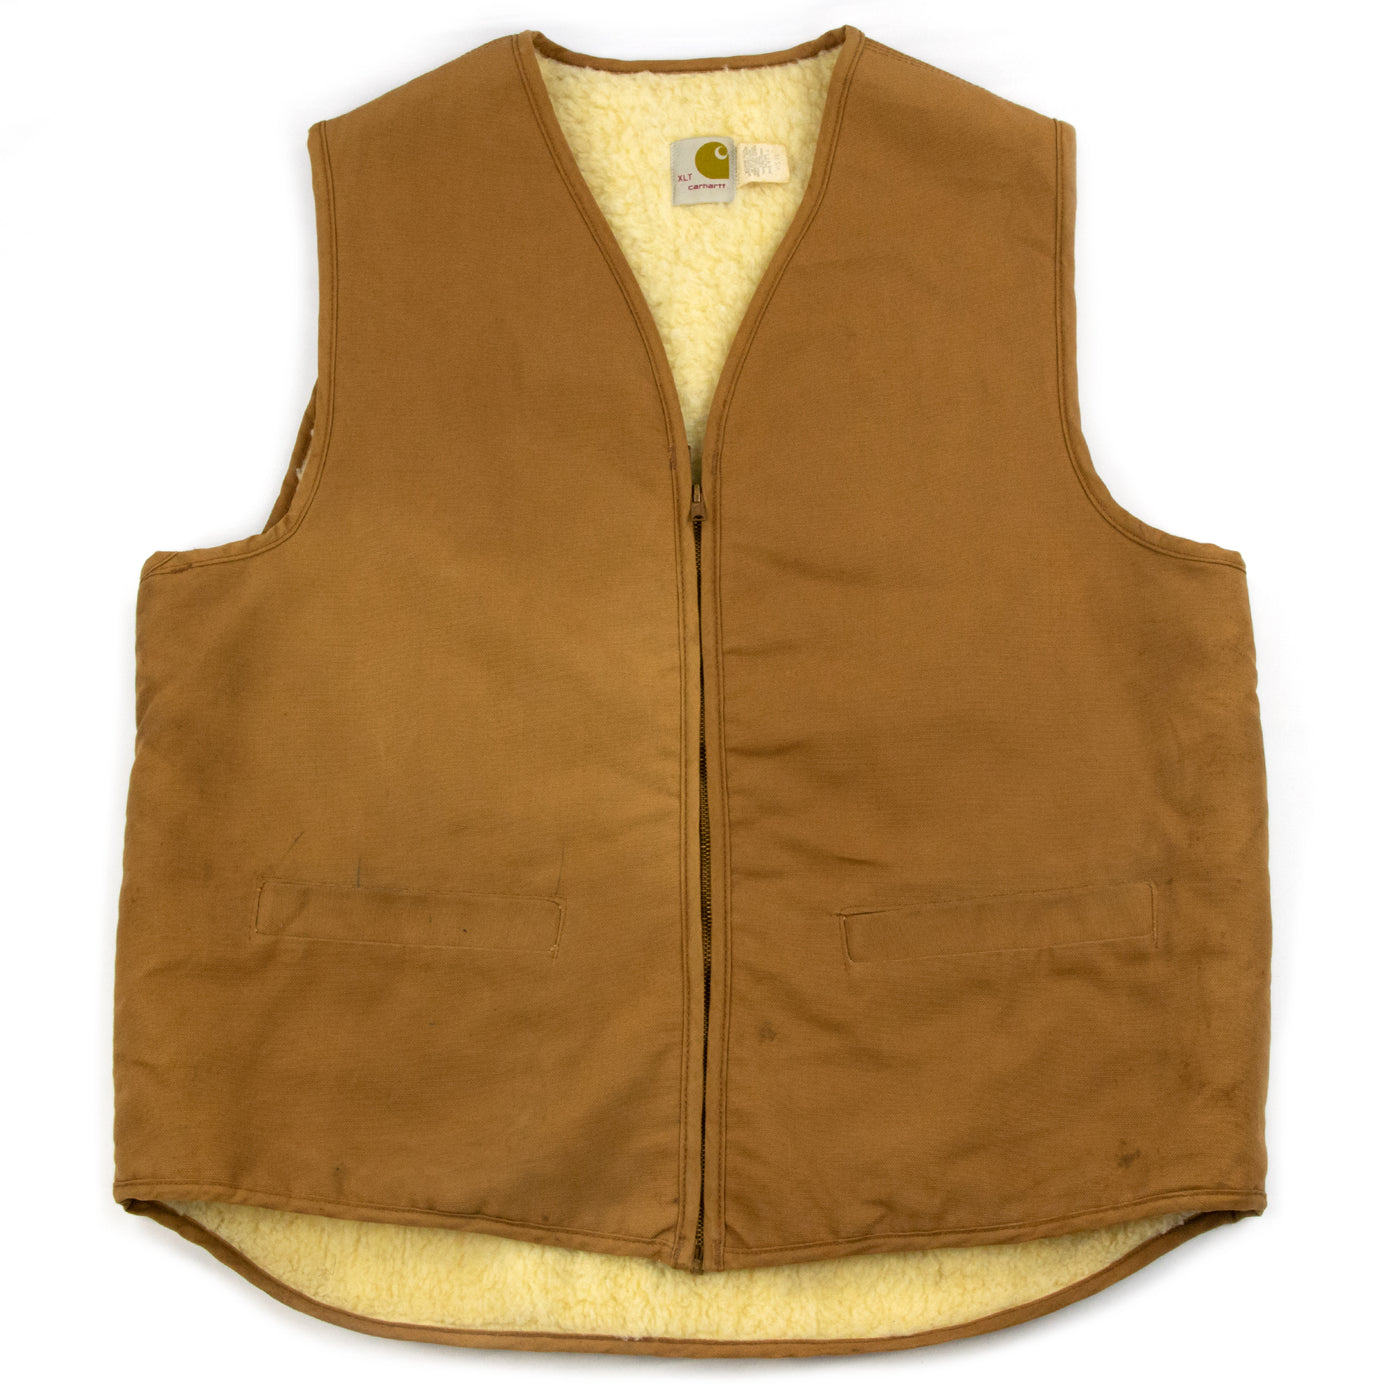 Vintage 70s Carhartt Gilet Duck Canvas Waistcoat Vest Sherpa Lined USA Made XL  FRONT